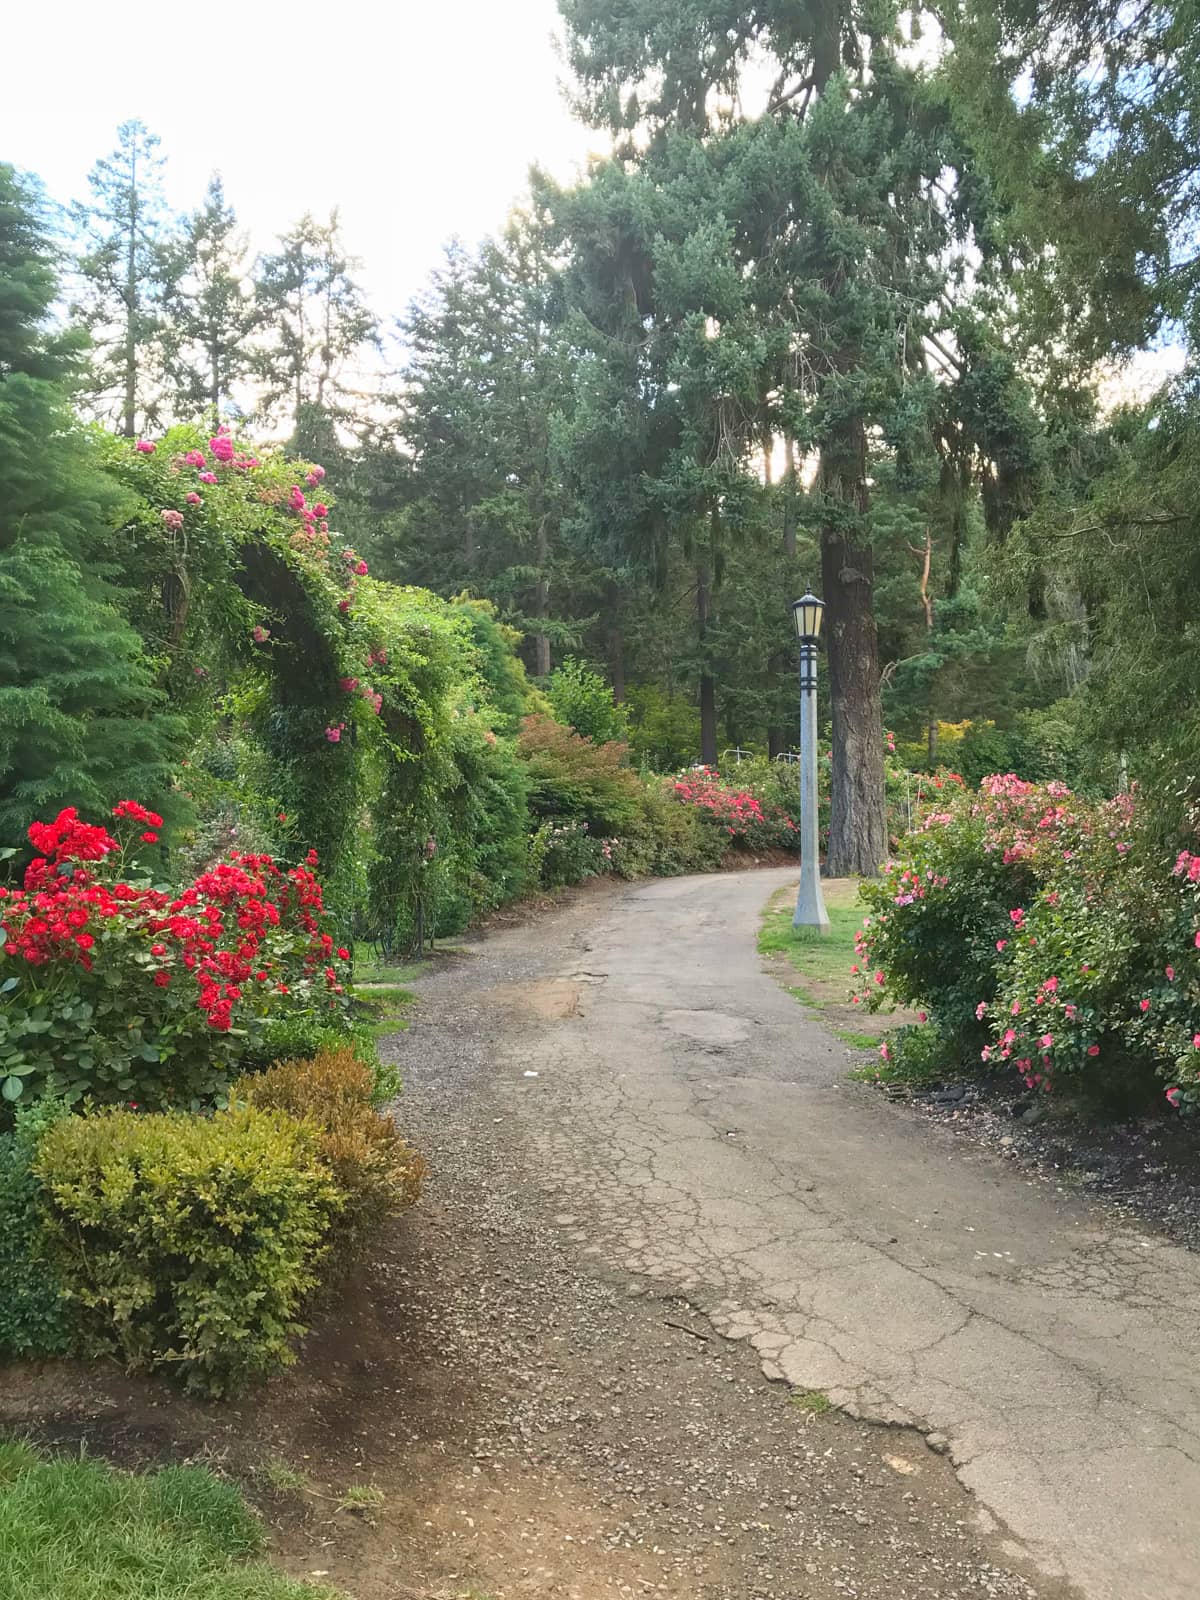 A concrete path going around a slight bend, with a lamp post to one side. There are different coloured rose arrangements in the bushes and hedges at the sides.